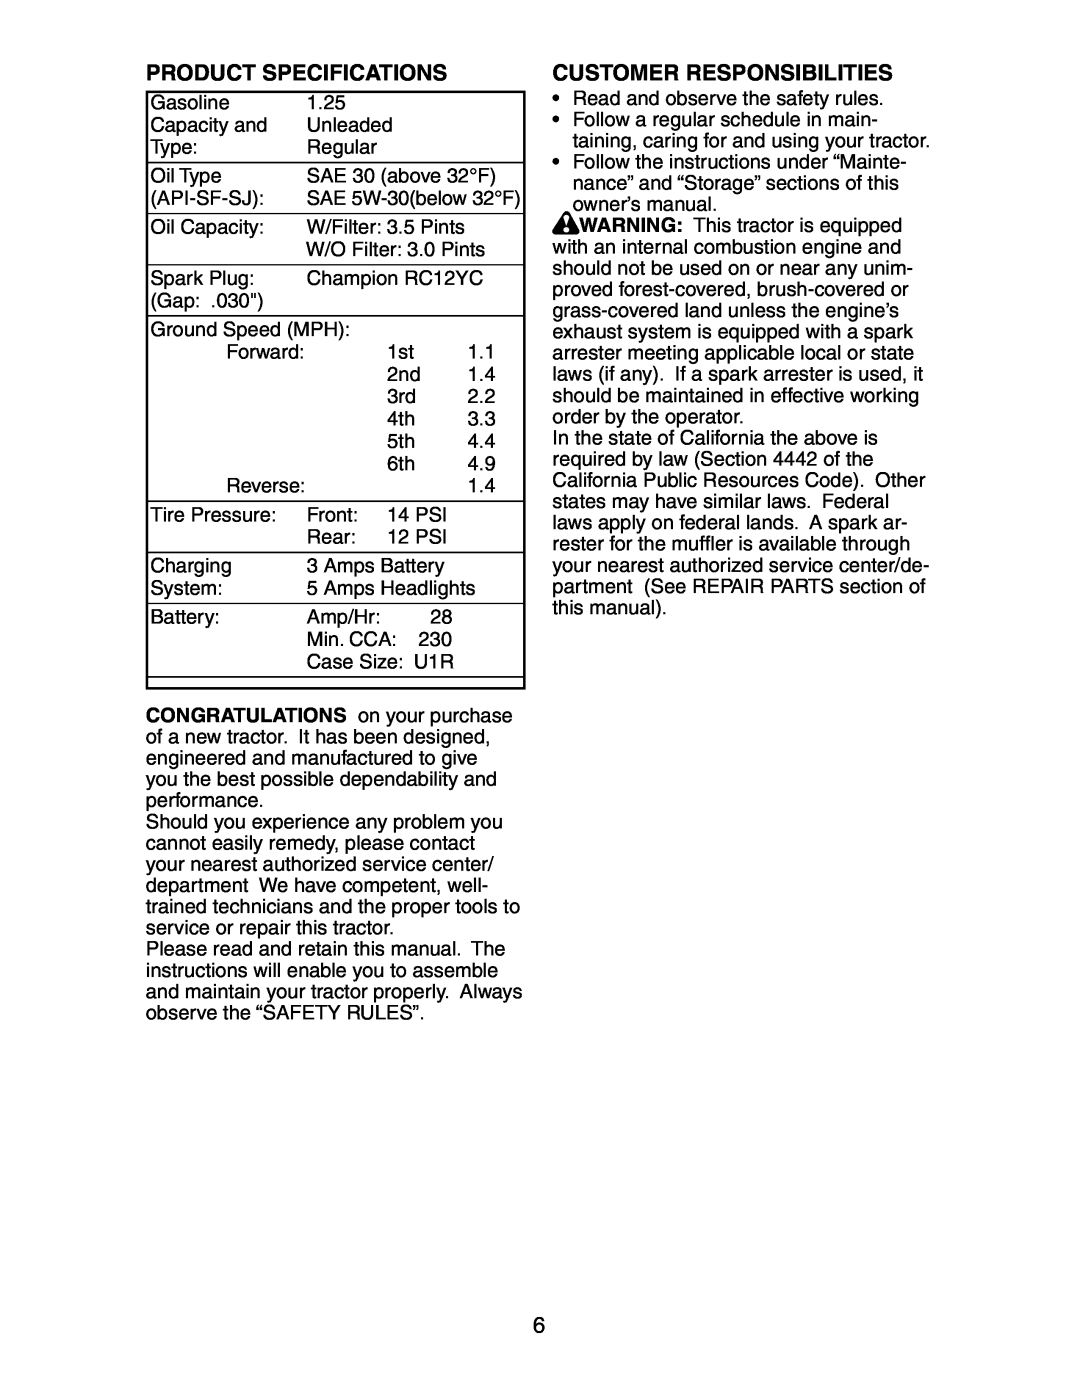 Poulan 191603 manual Product Specifications, Customer Responsibilities 